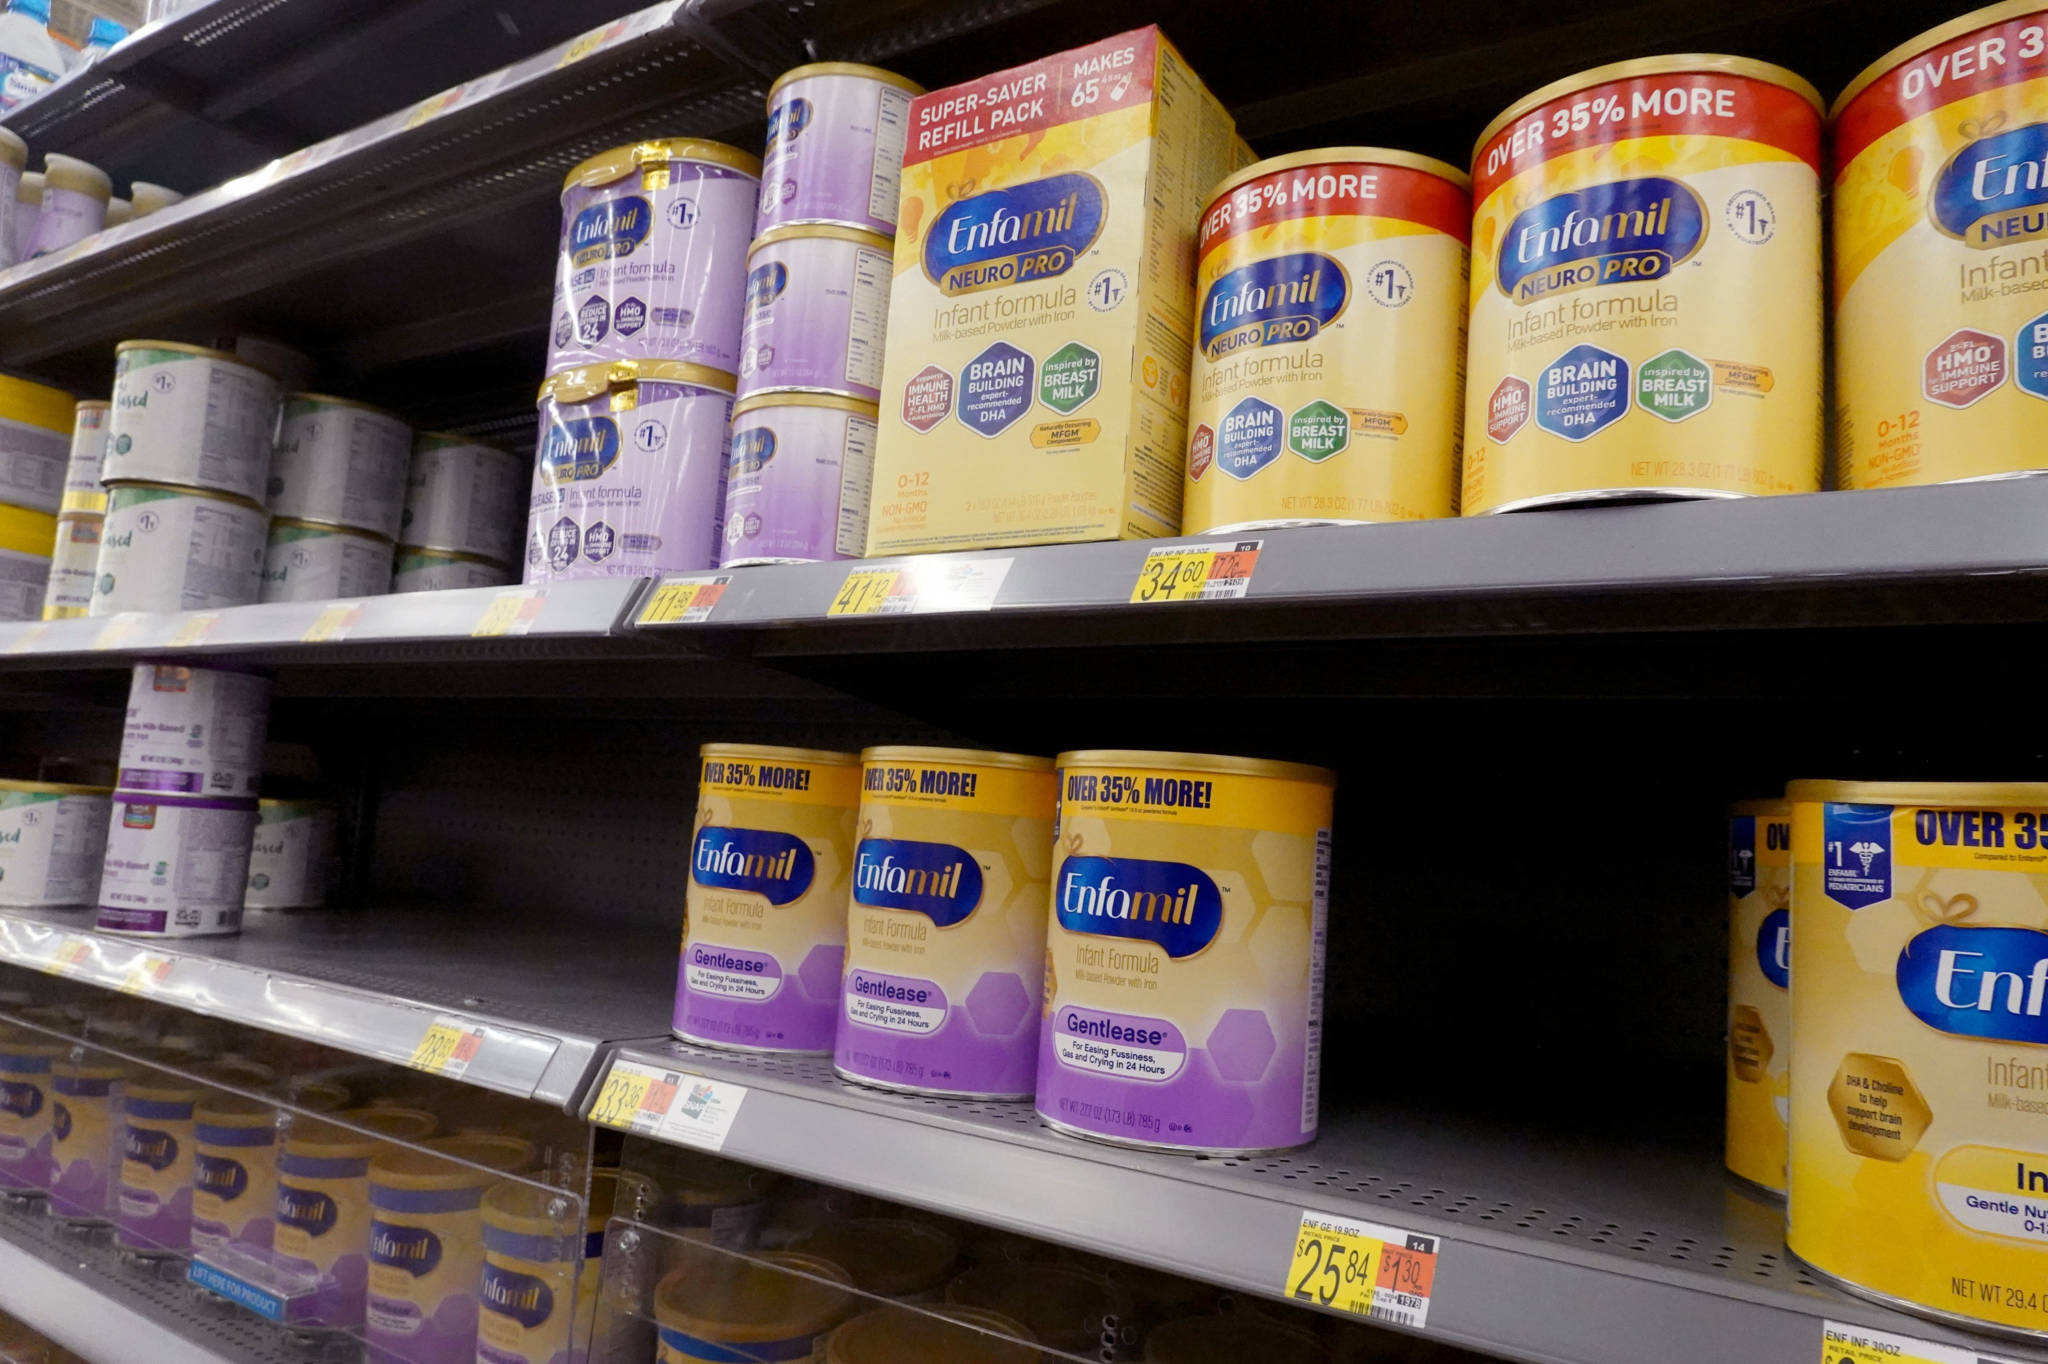 A shortage of baby formula is worsening and causing some stores to